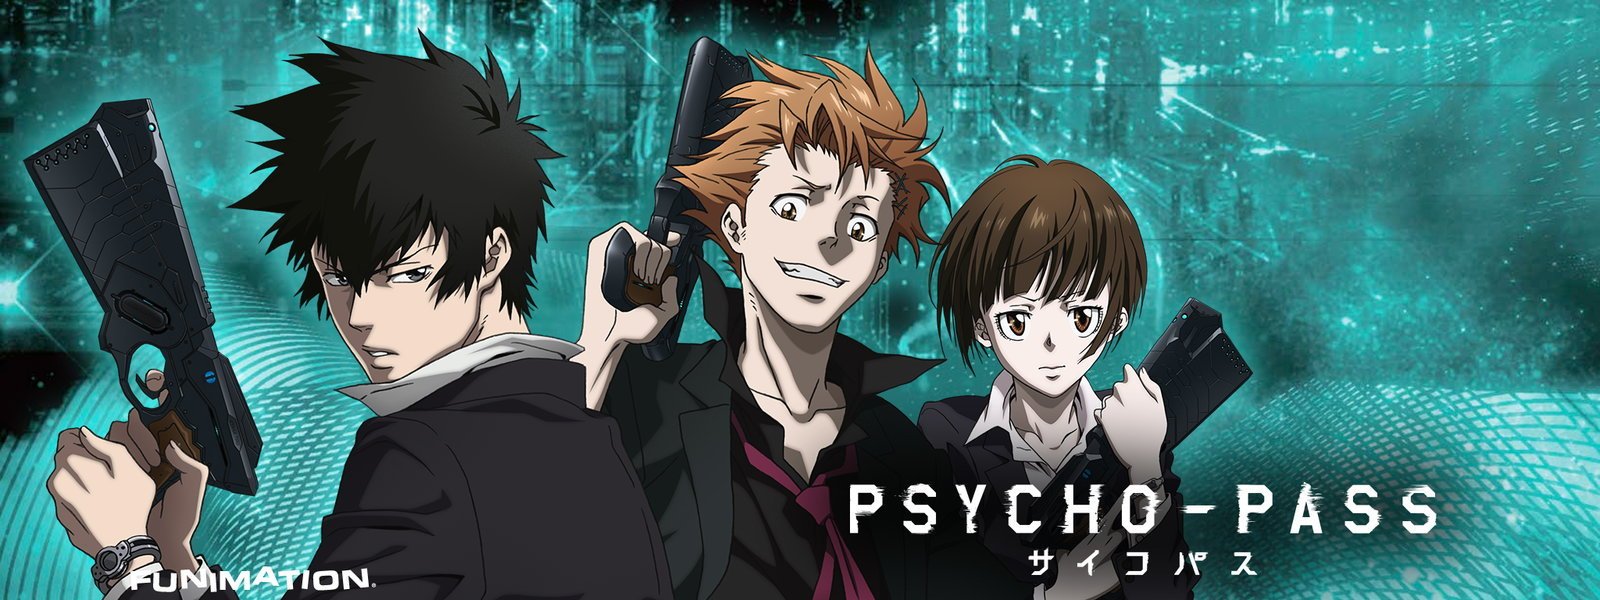 Nice Images Collection: Psycho-Pass Desktop Wallpapers